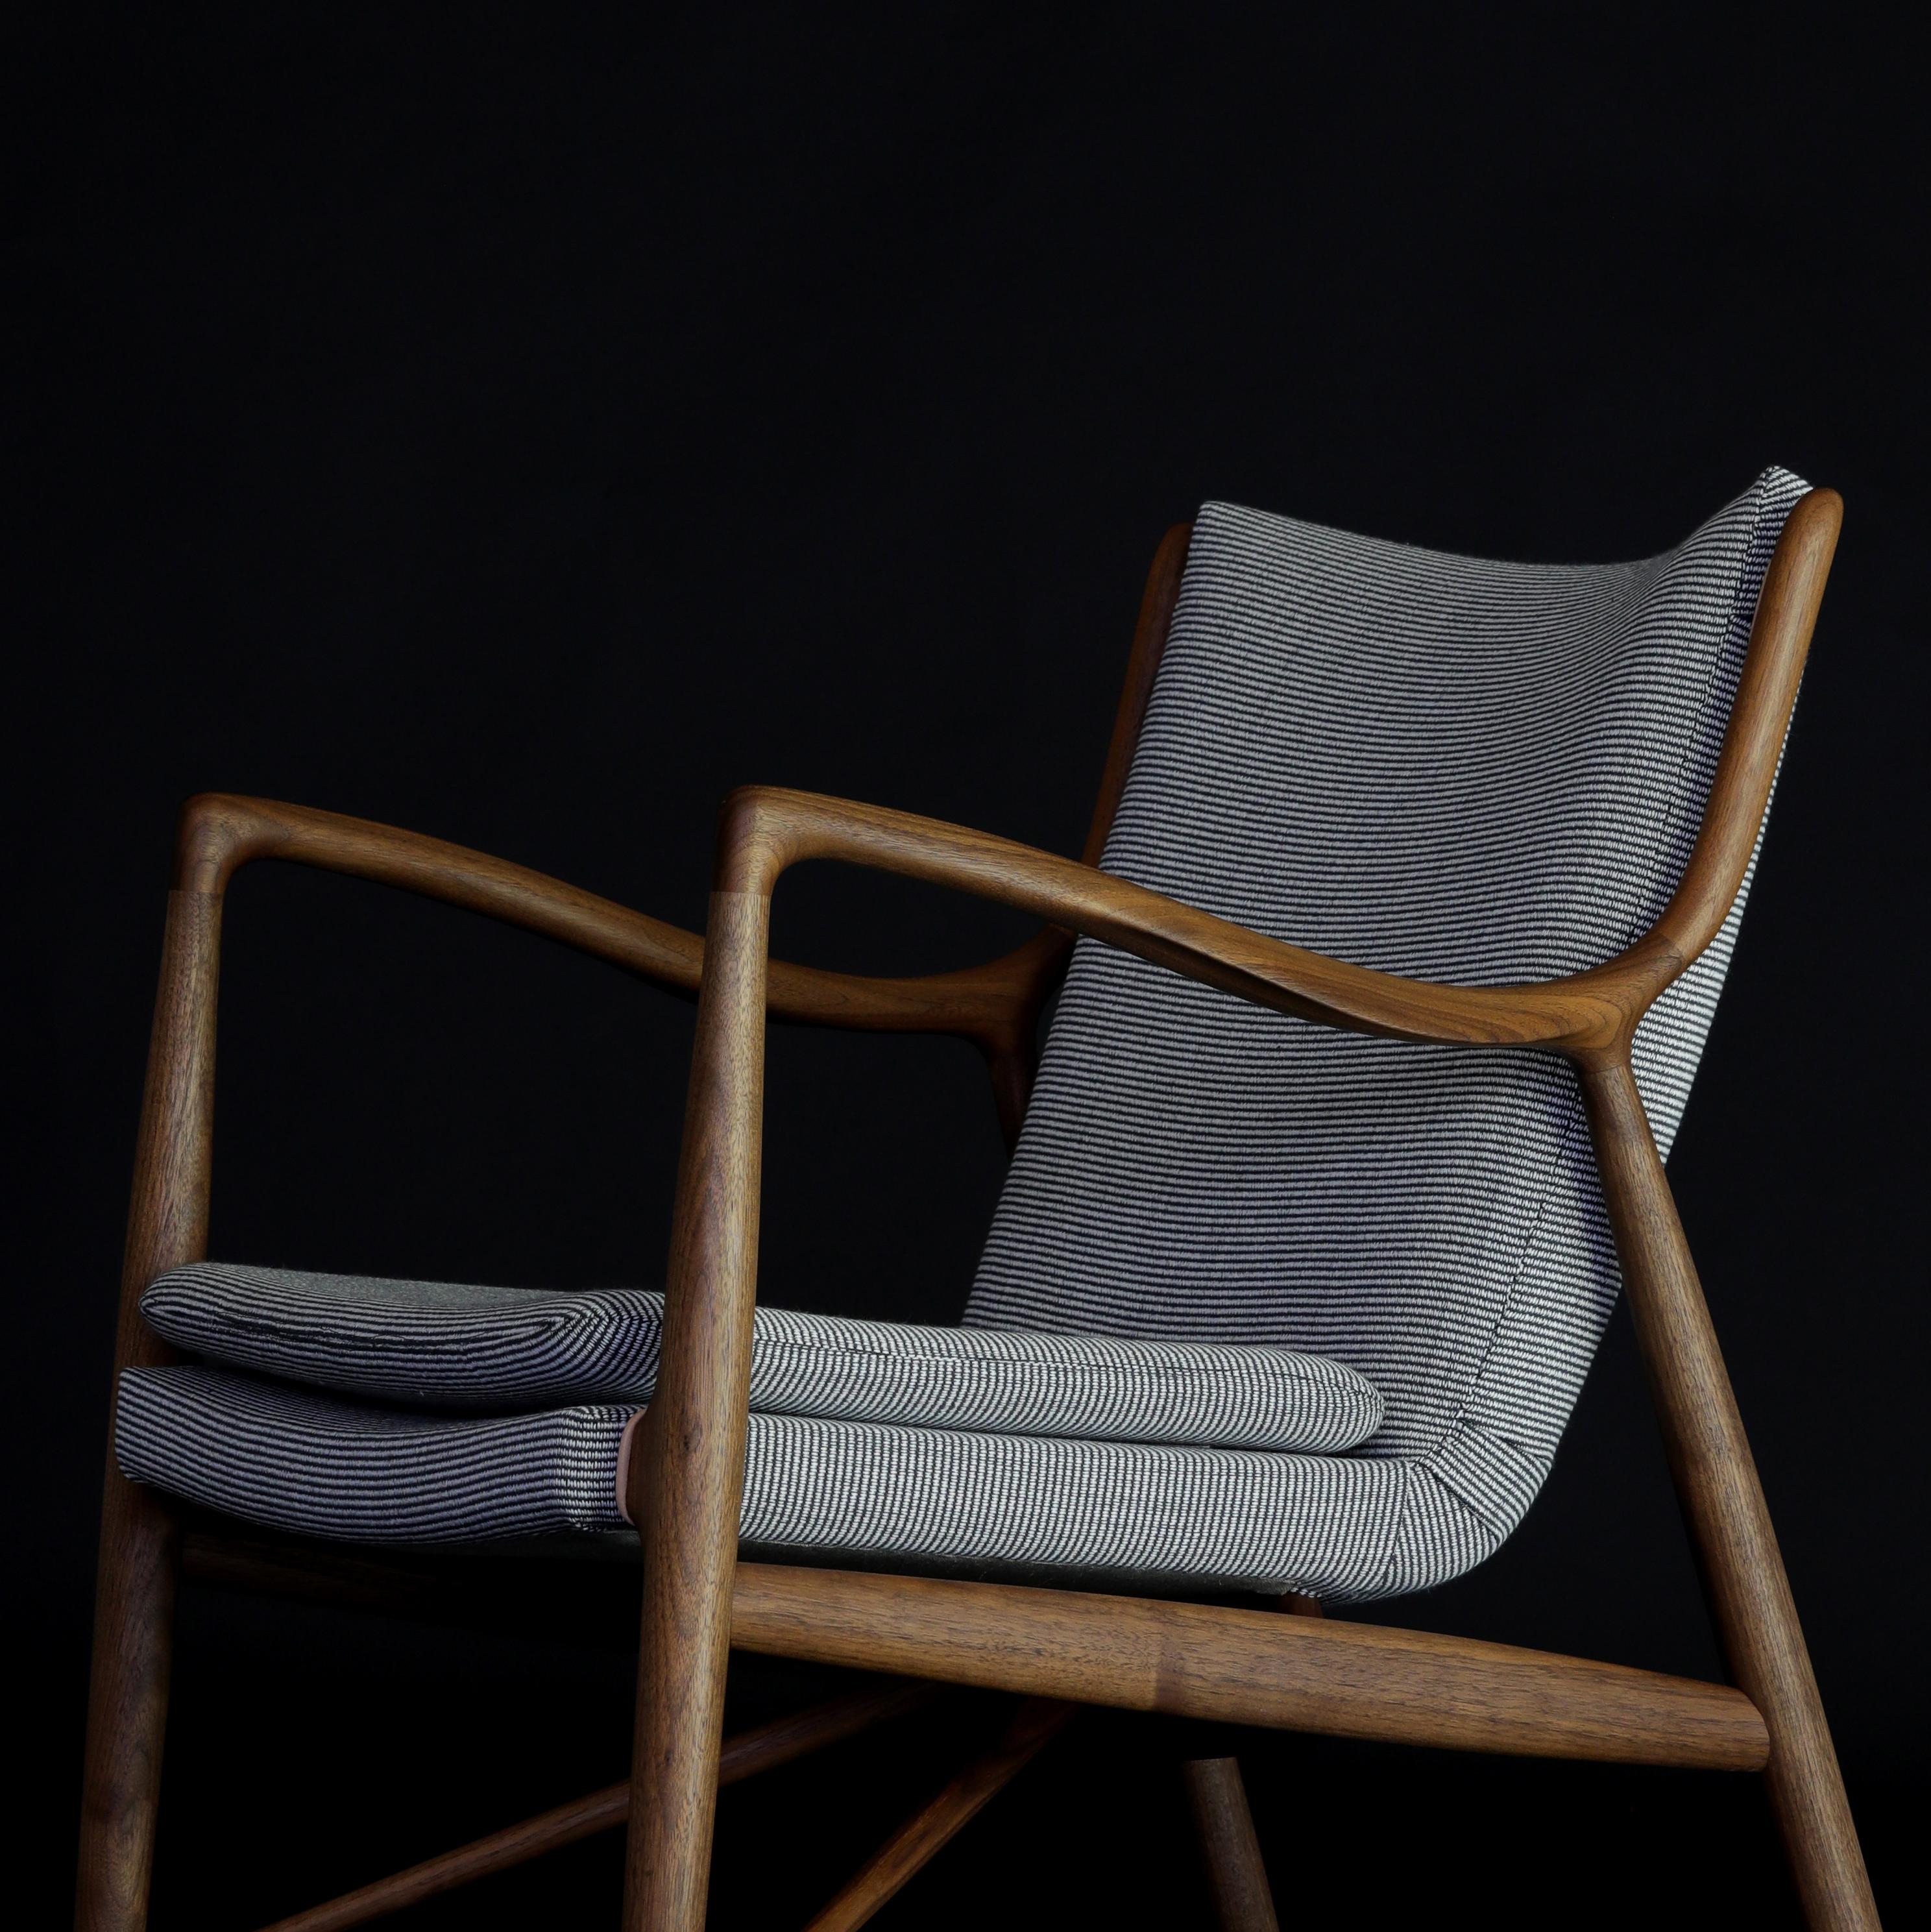 Chair designed by Finn Juhl
Manufactured by One collection Finn Juhl (Denmark)

The space between the frame and the seat creates a lightness, which, combined with its organic shape and sublime detailing, creates a unique beauty. The chair is also